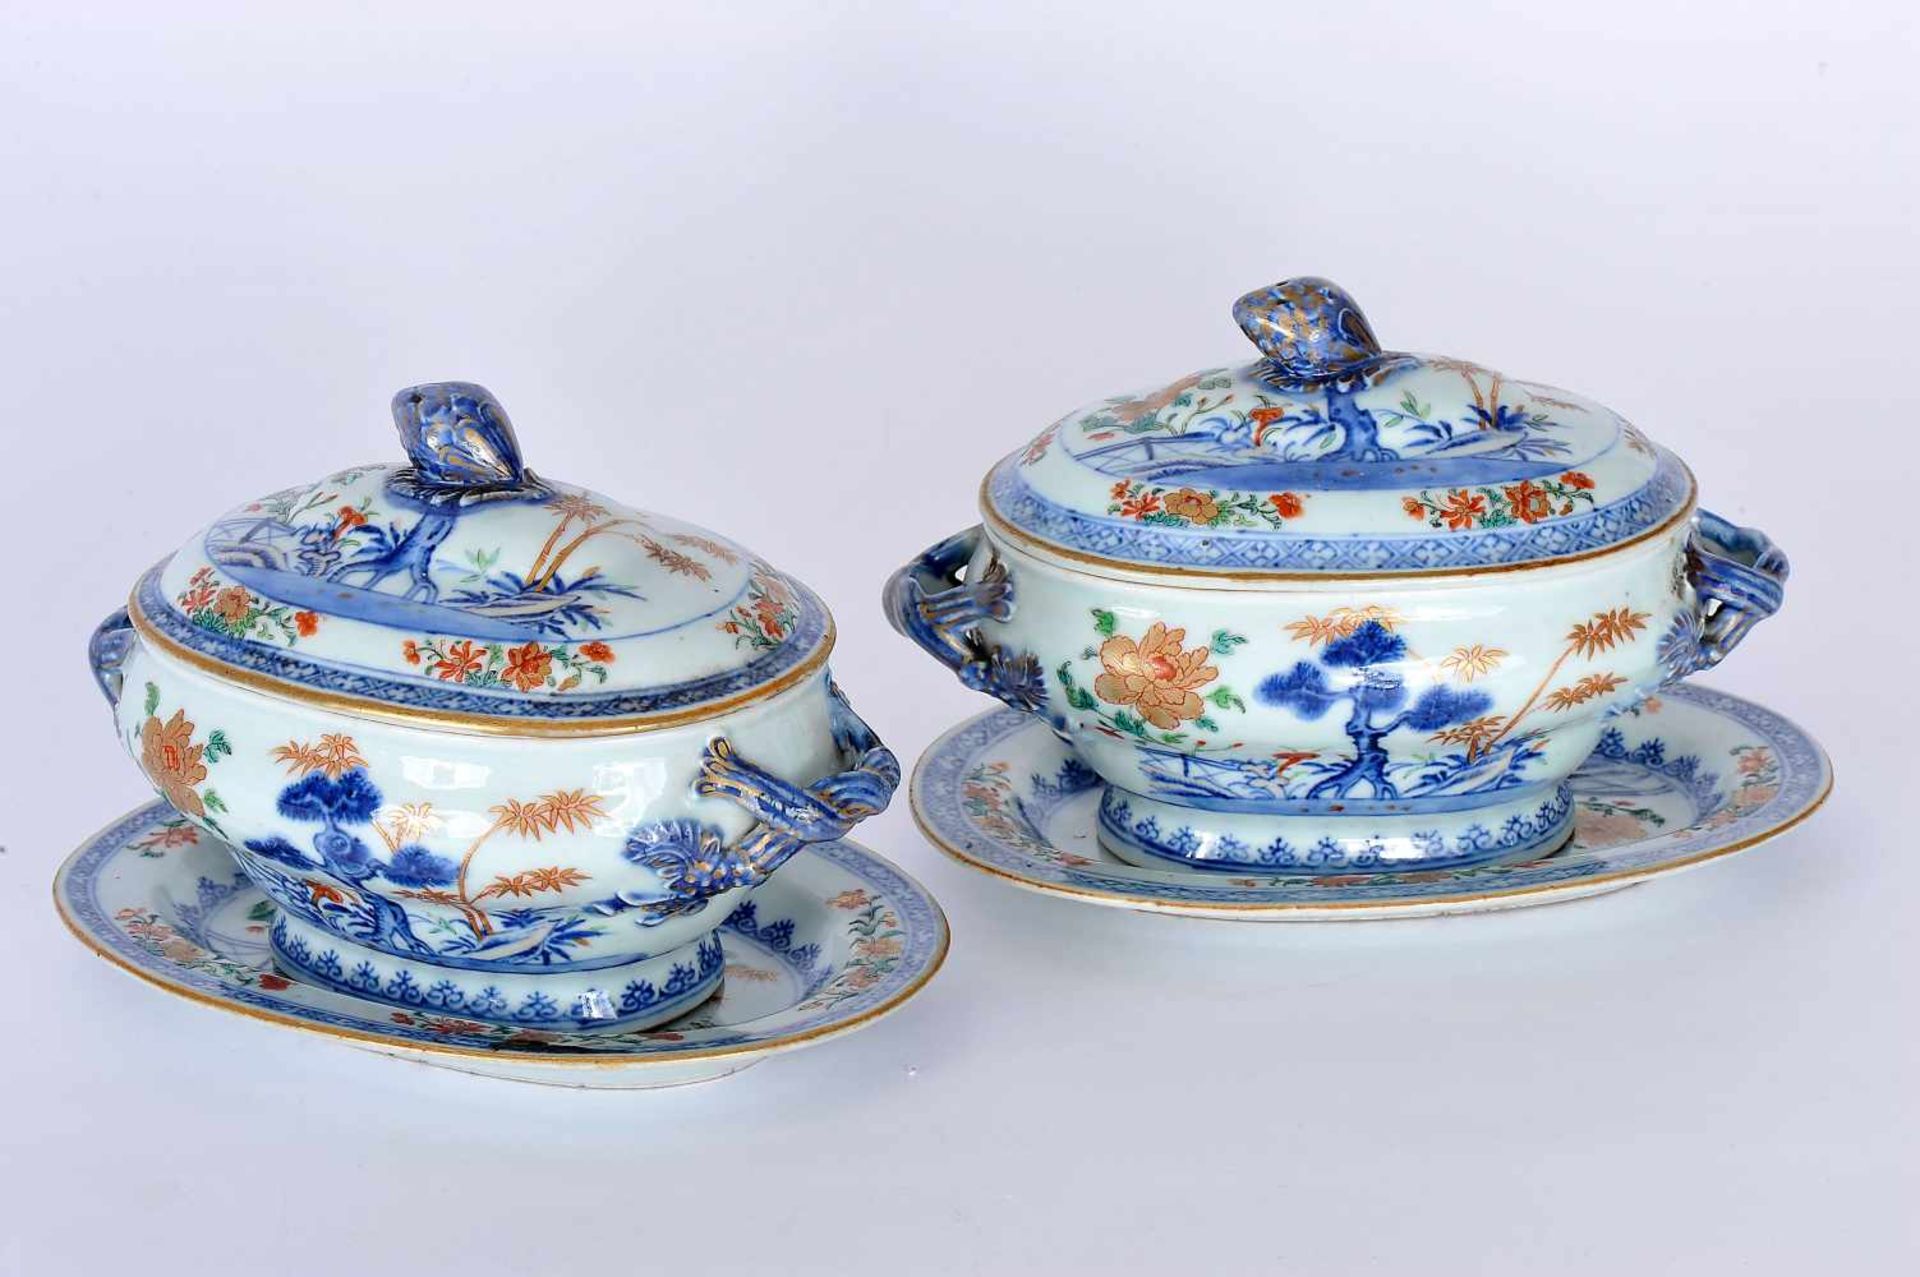 A Pair of Small Tureens with Oval Stands, Chinese export porcelain, polychrome and gilt